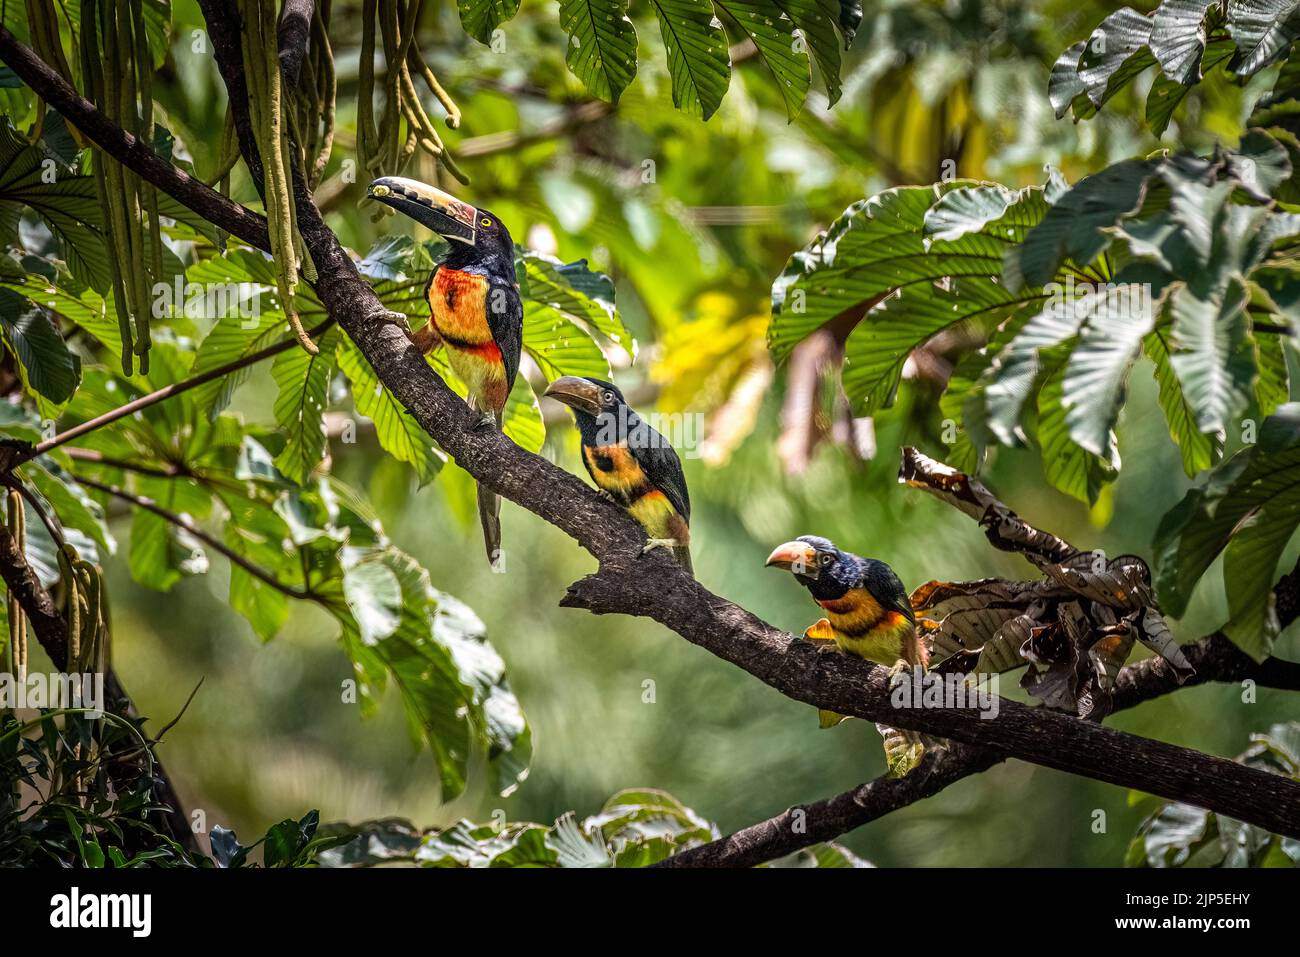 Collared acarari leaving the nest for the first time parent showing the chicks what to eat in the rain forest of Panama Stock Photo